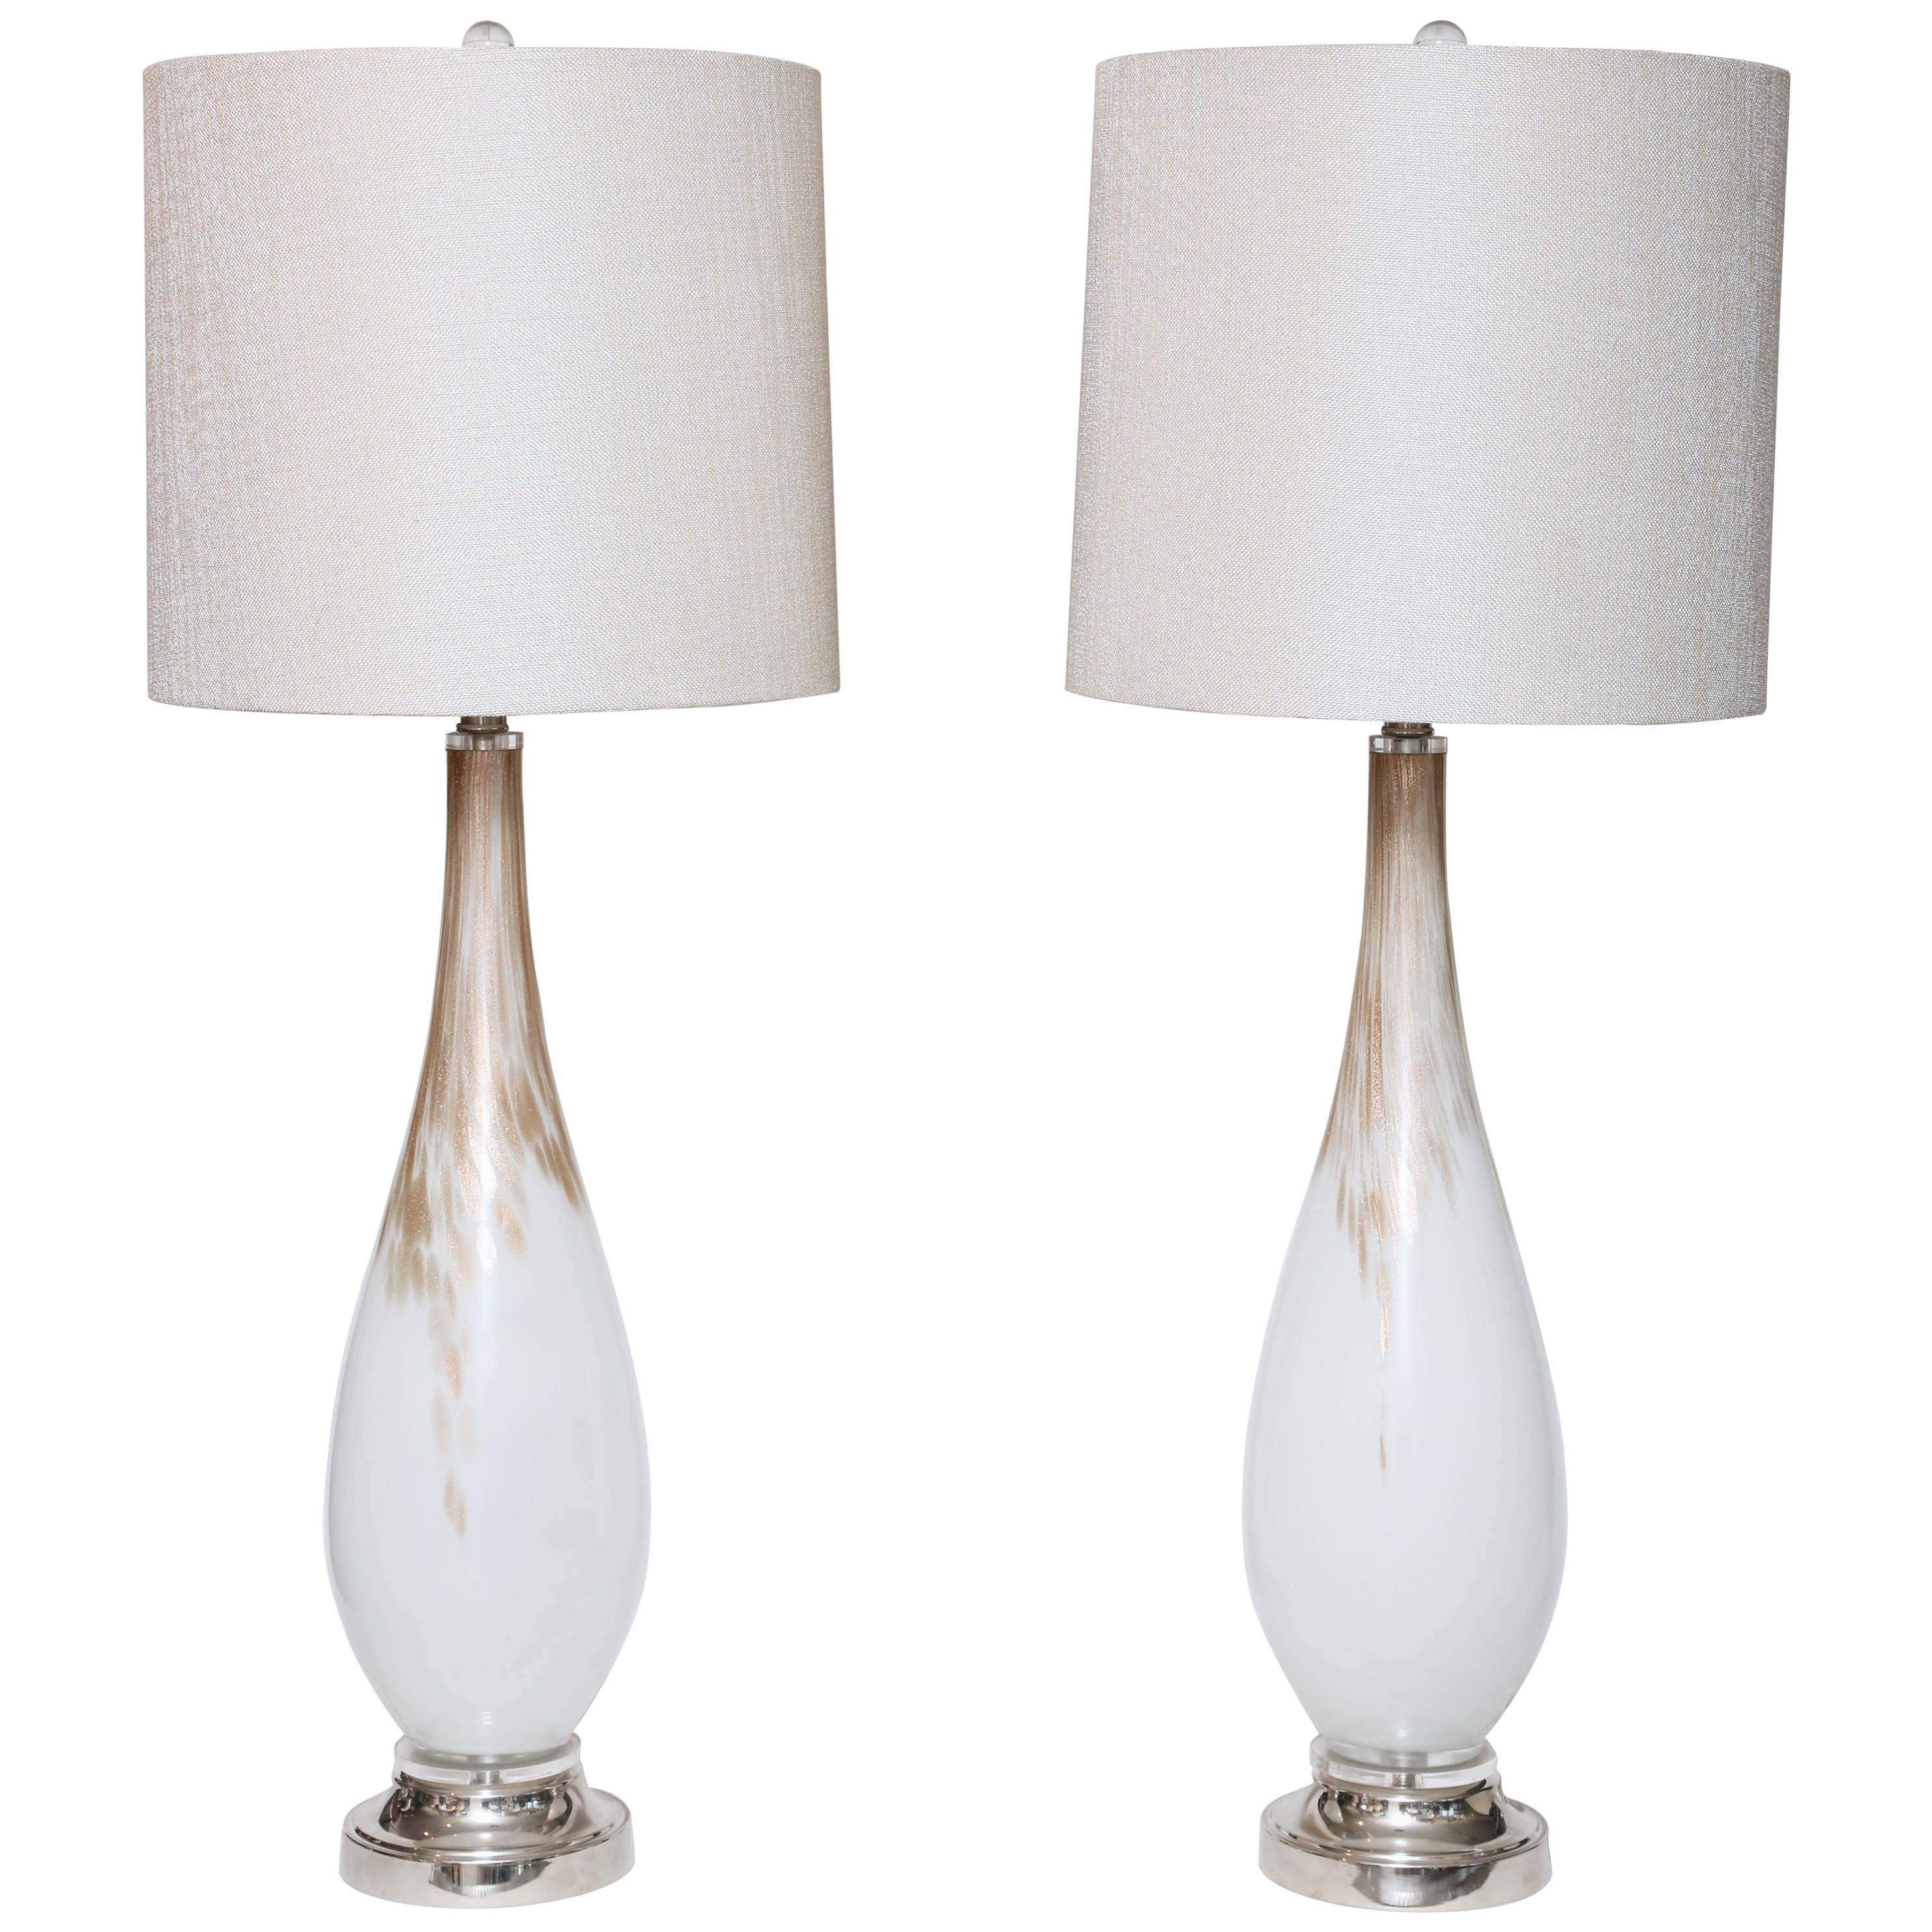 Pair of Mid-Century Modern Italian Murano Copper/White Glass Teardrop Lamps For Sale